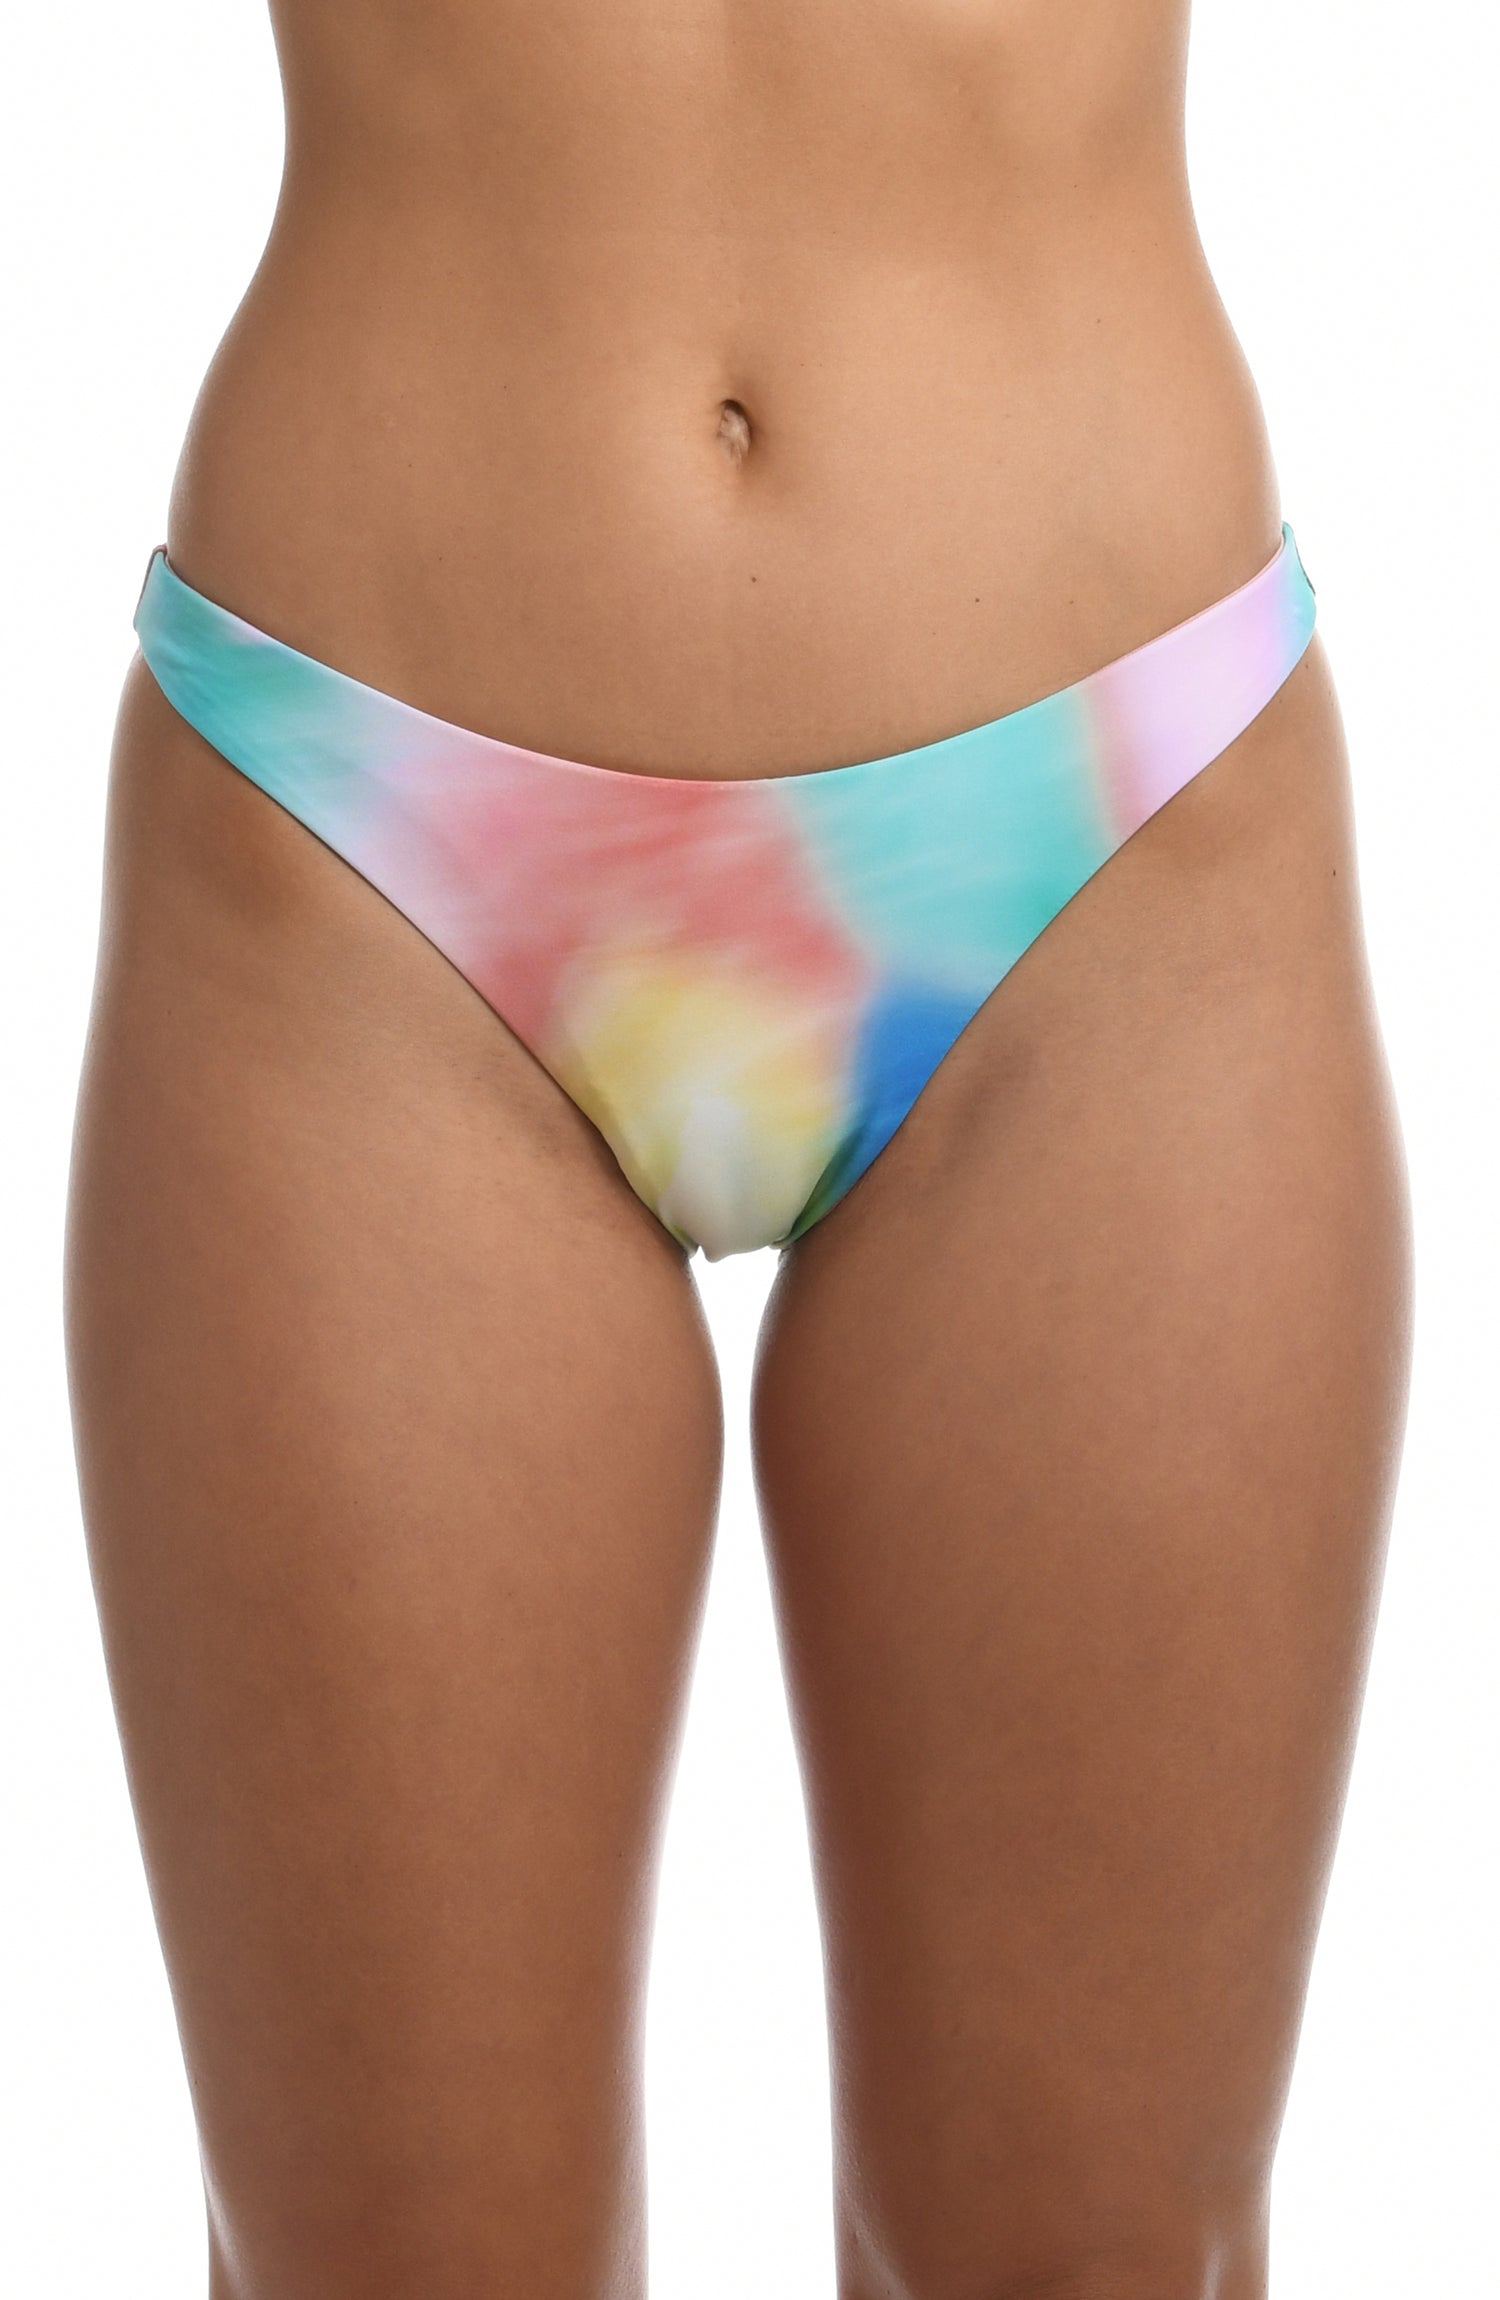 Model is wearing a multi-colored tie-dye inspired hipster swimsuit bottom from our Sunset Tide collection!